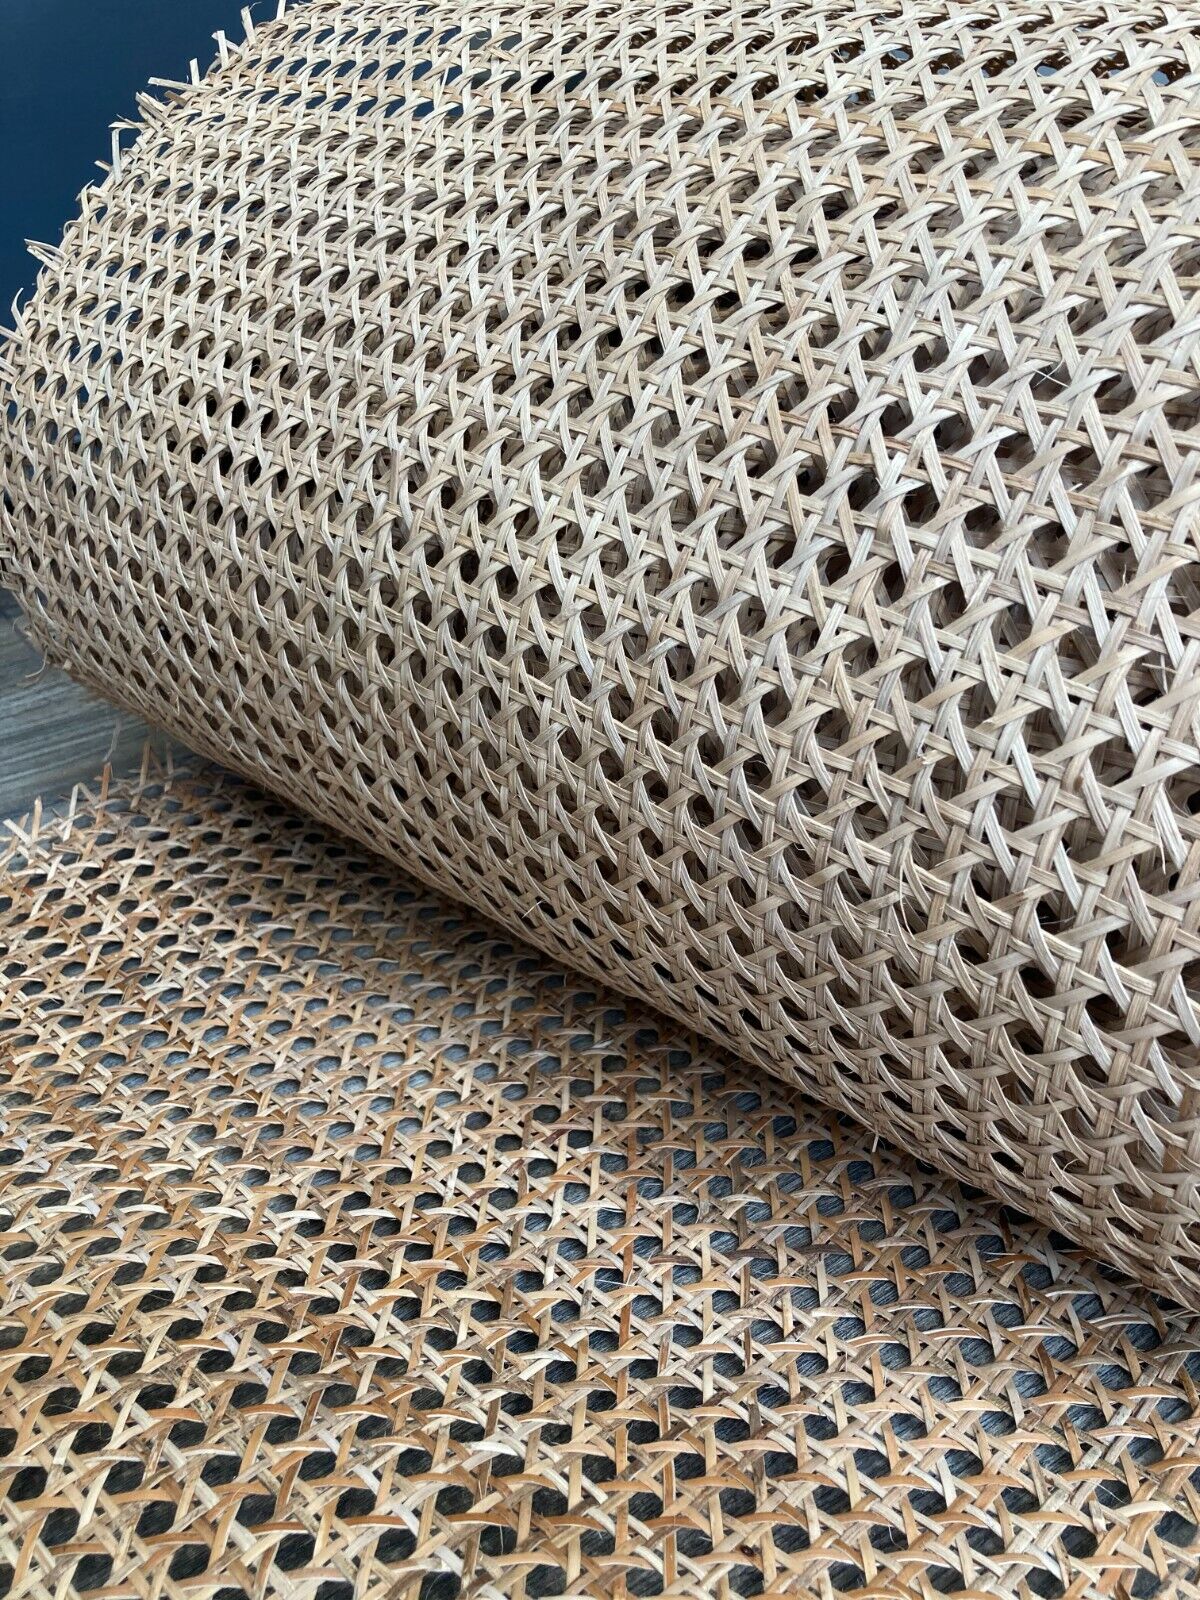 Natural OFFicial shop Cane Webbing Roll Rattan Fabric len x width 50cm various Spasm price